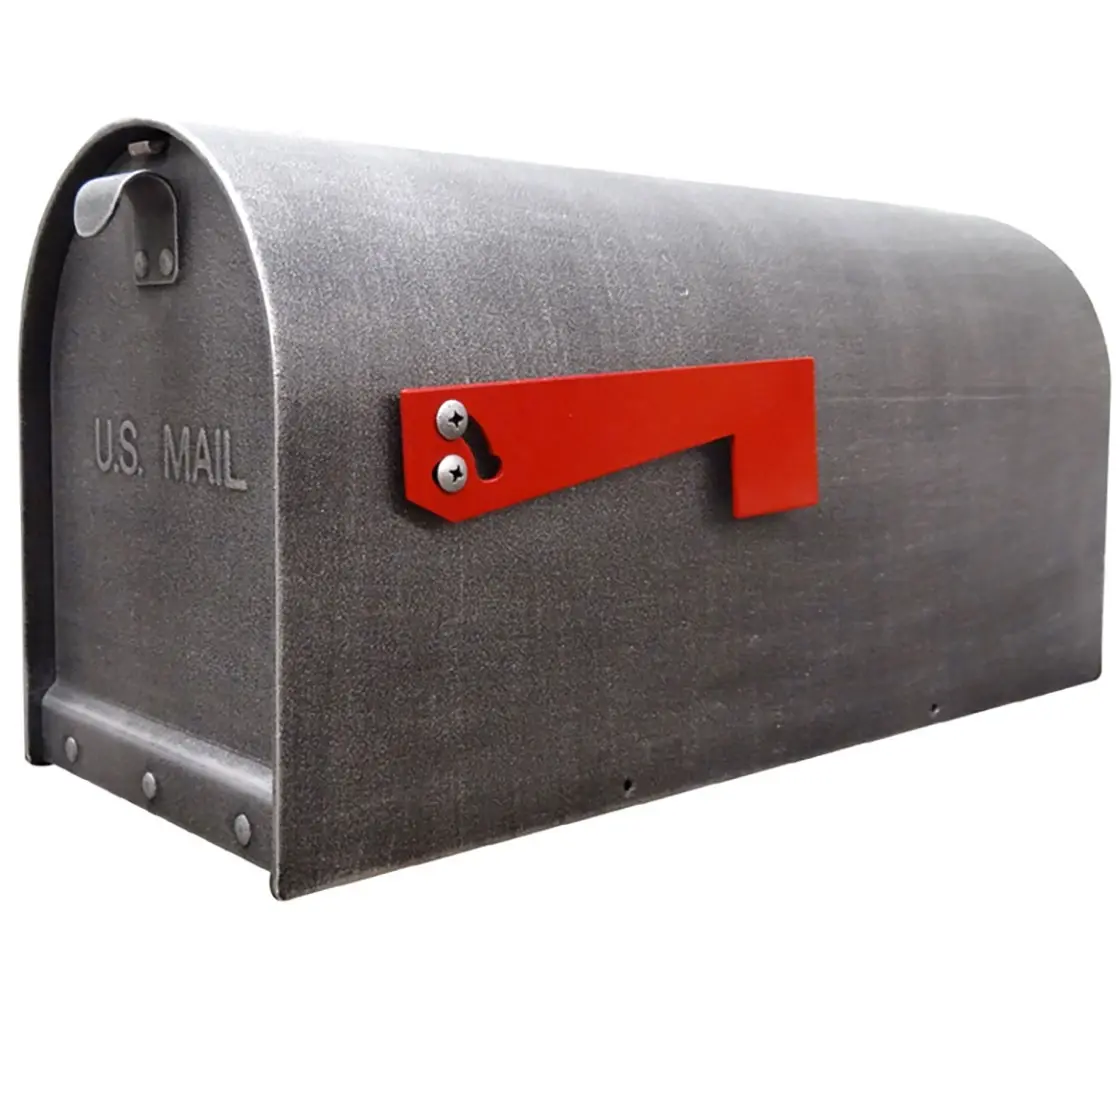 Standard Aluminum Finished Mail Box Locking Drop Box Door Mount Metal Mailbox for Rent Payments Newspaper Mail Keys Cash and C